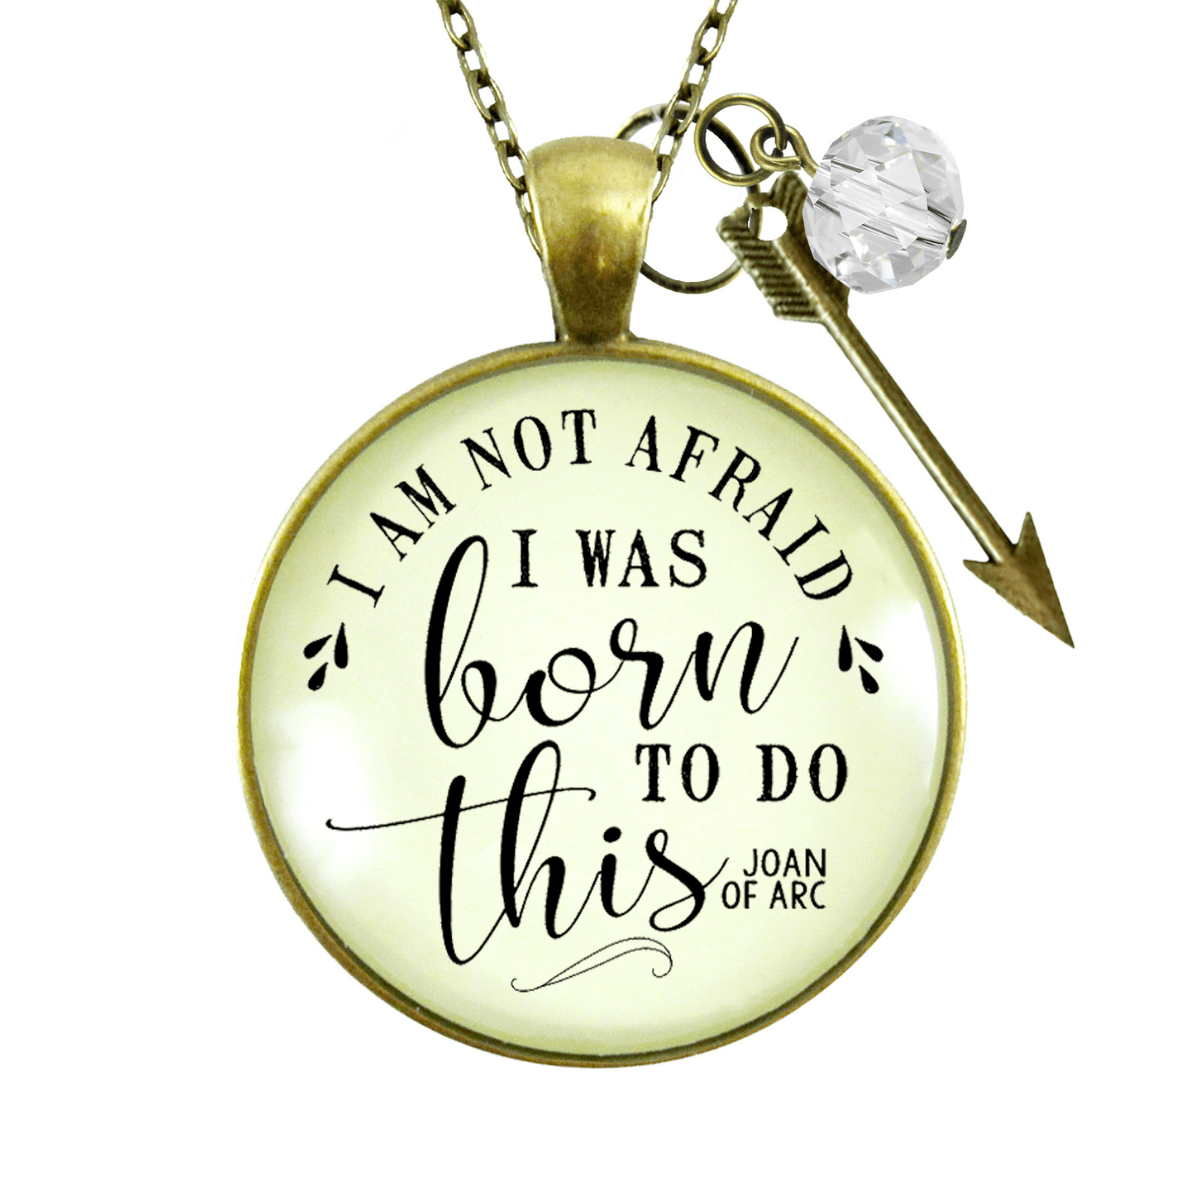 Gutsy Goodness I Am Not Afraid Necklace I Was Born Quote Joan of Arc Boho Jewelry - Gutsy Goodness Handmade Jewelry;I Am Not Afraid Necklace I Was Born Quote Joan Of Arc Boho Jewelry - Gutsy Goodness Handmade Jewelry Gifts